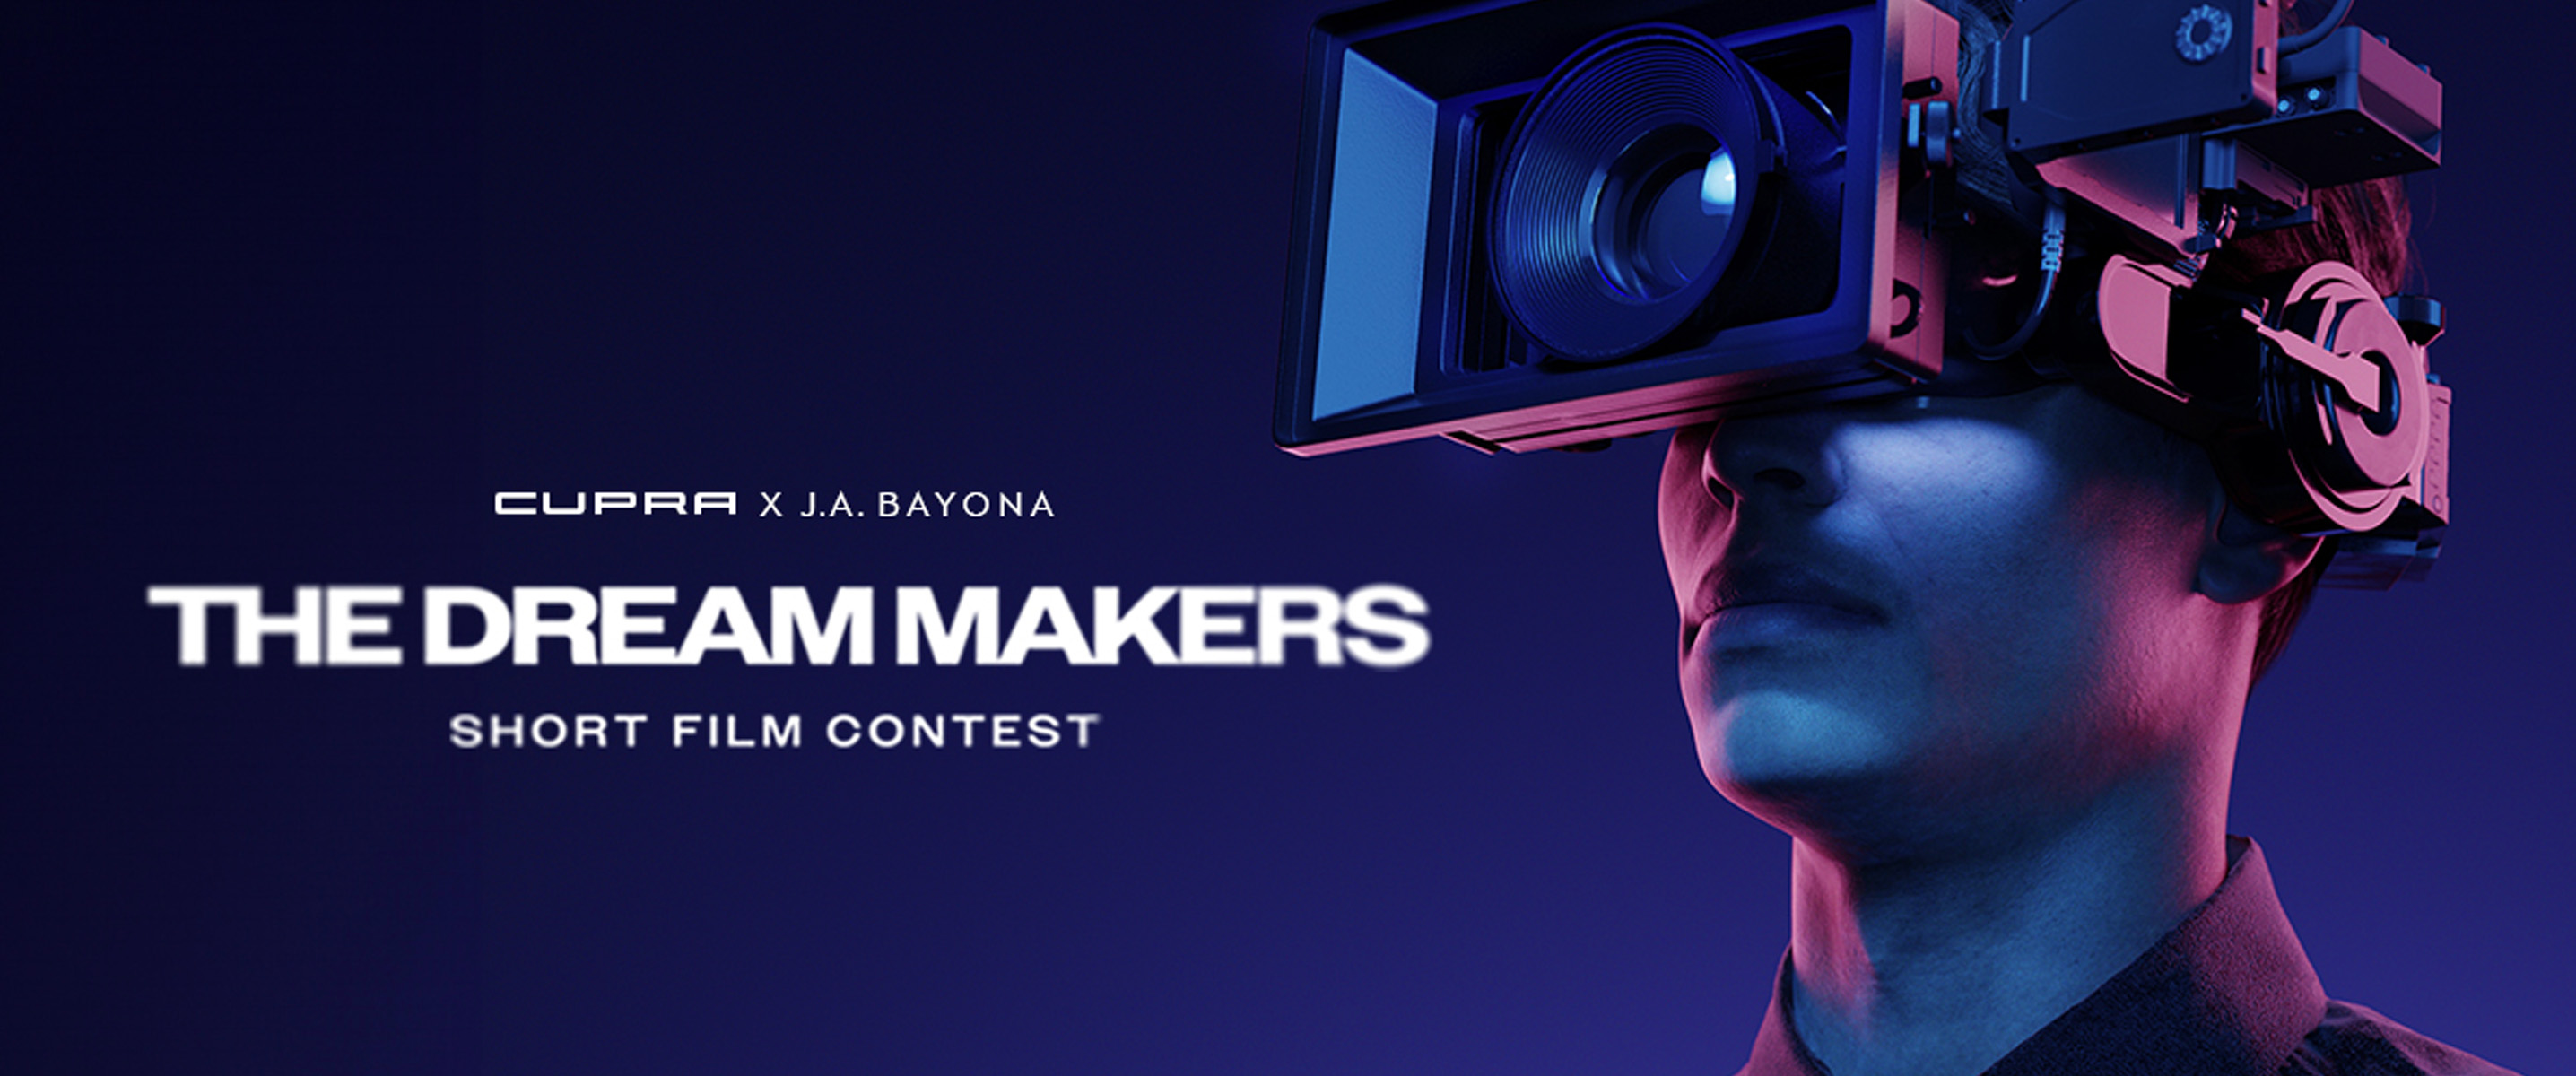 The Dream Makers Contest